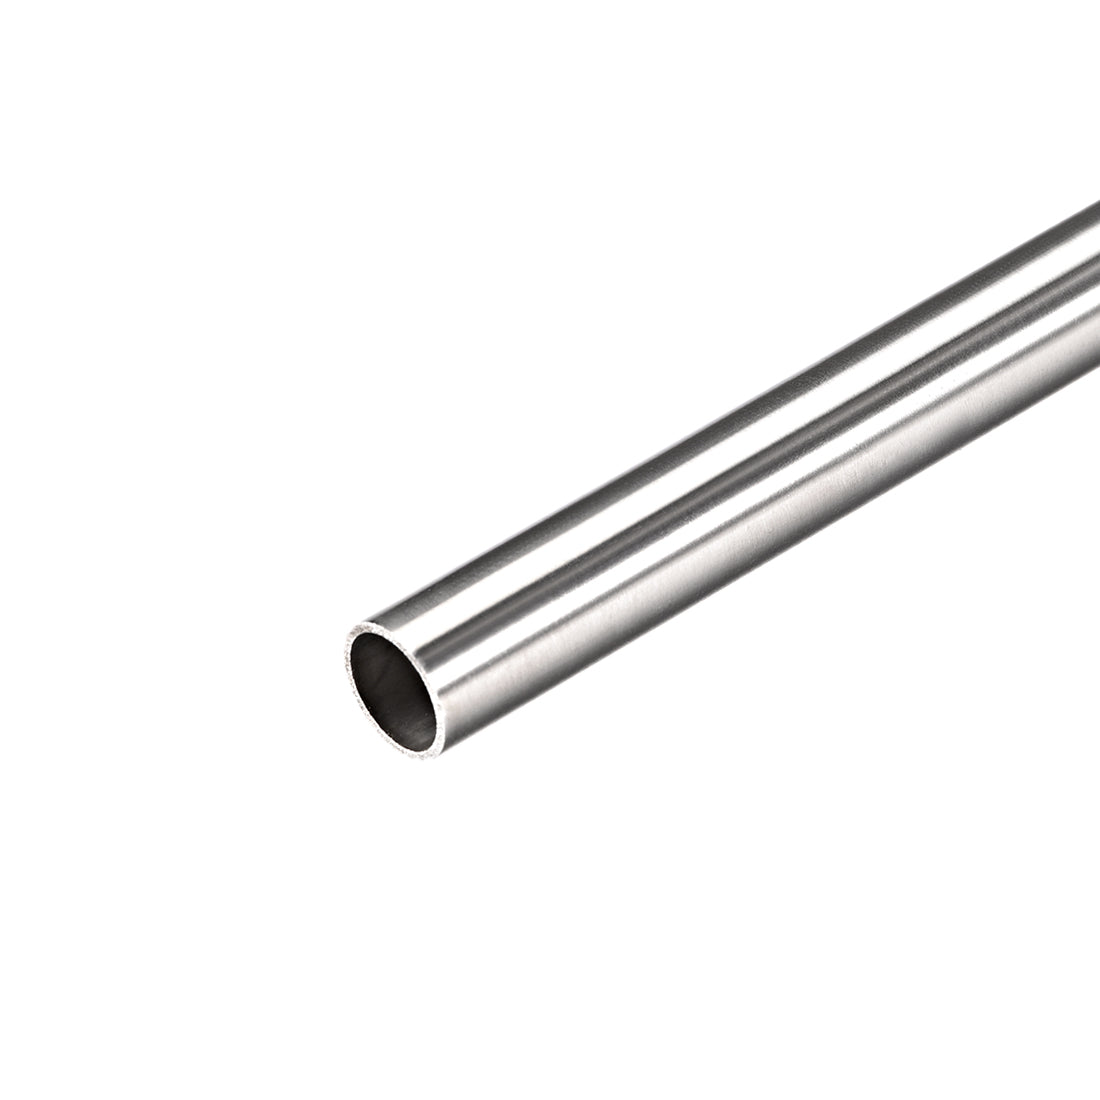 uxcell Uxcell 304 Stainless Steel Capillary Tube 7.5mm ID 9.5mm OD 300mm Long 1mm Wall